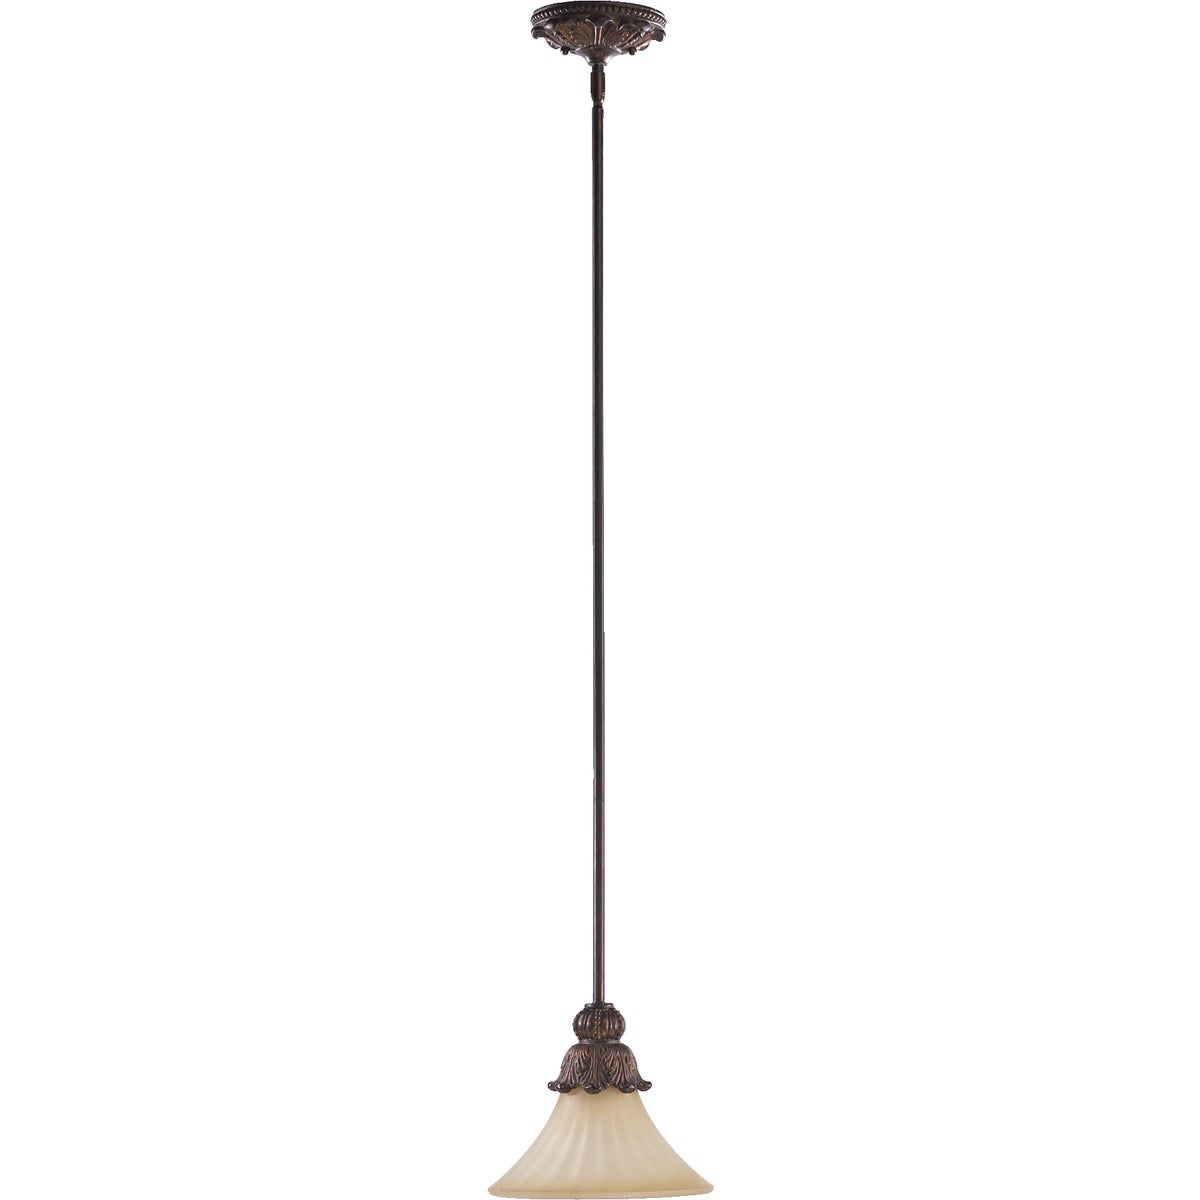 Traditional pendant light with corsican gold finish, featuring a cast structure and ornate wood and bronze detailing. 9&quot;W x 10.75&quot;H.